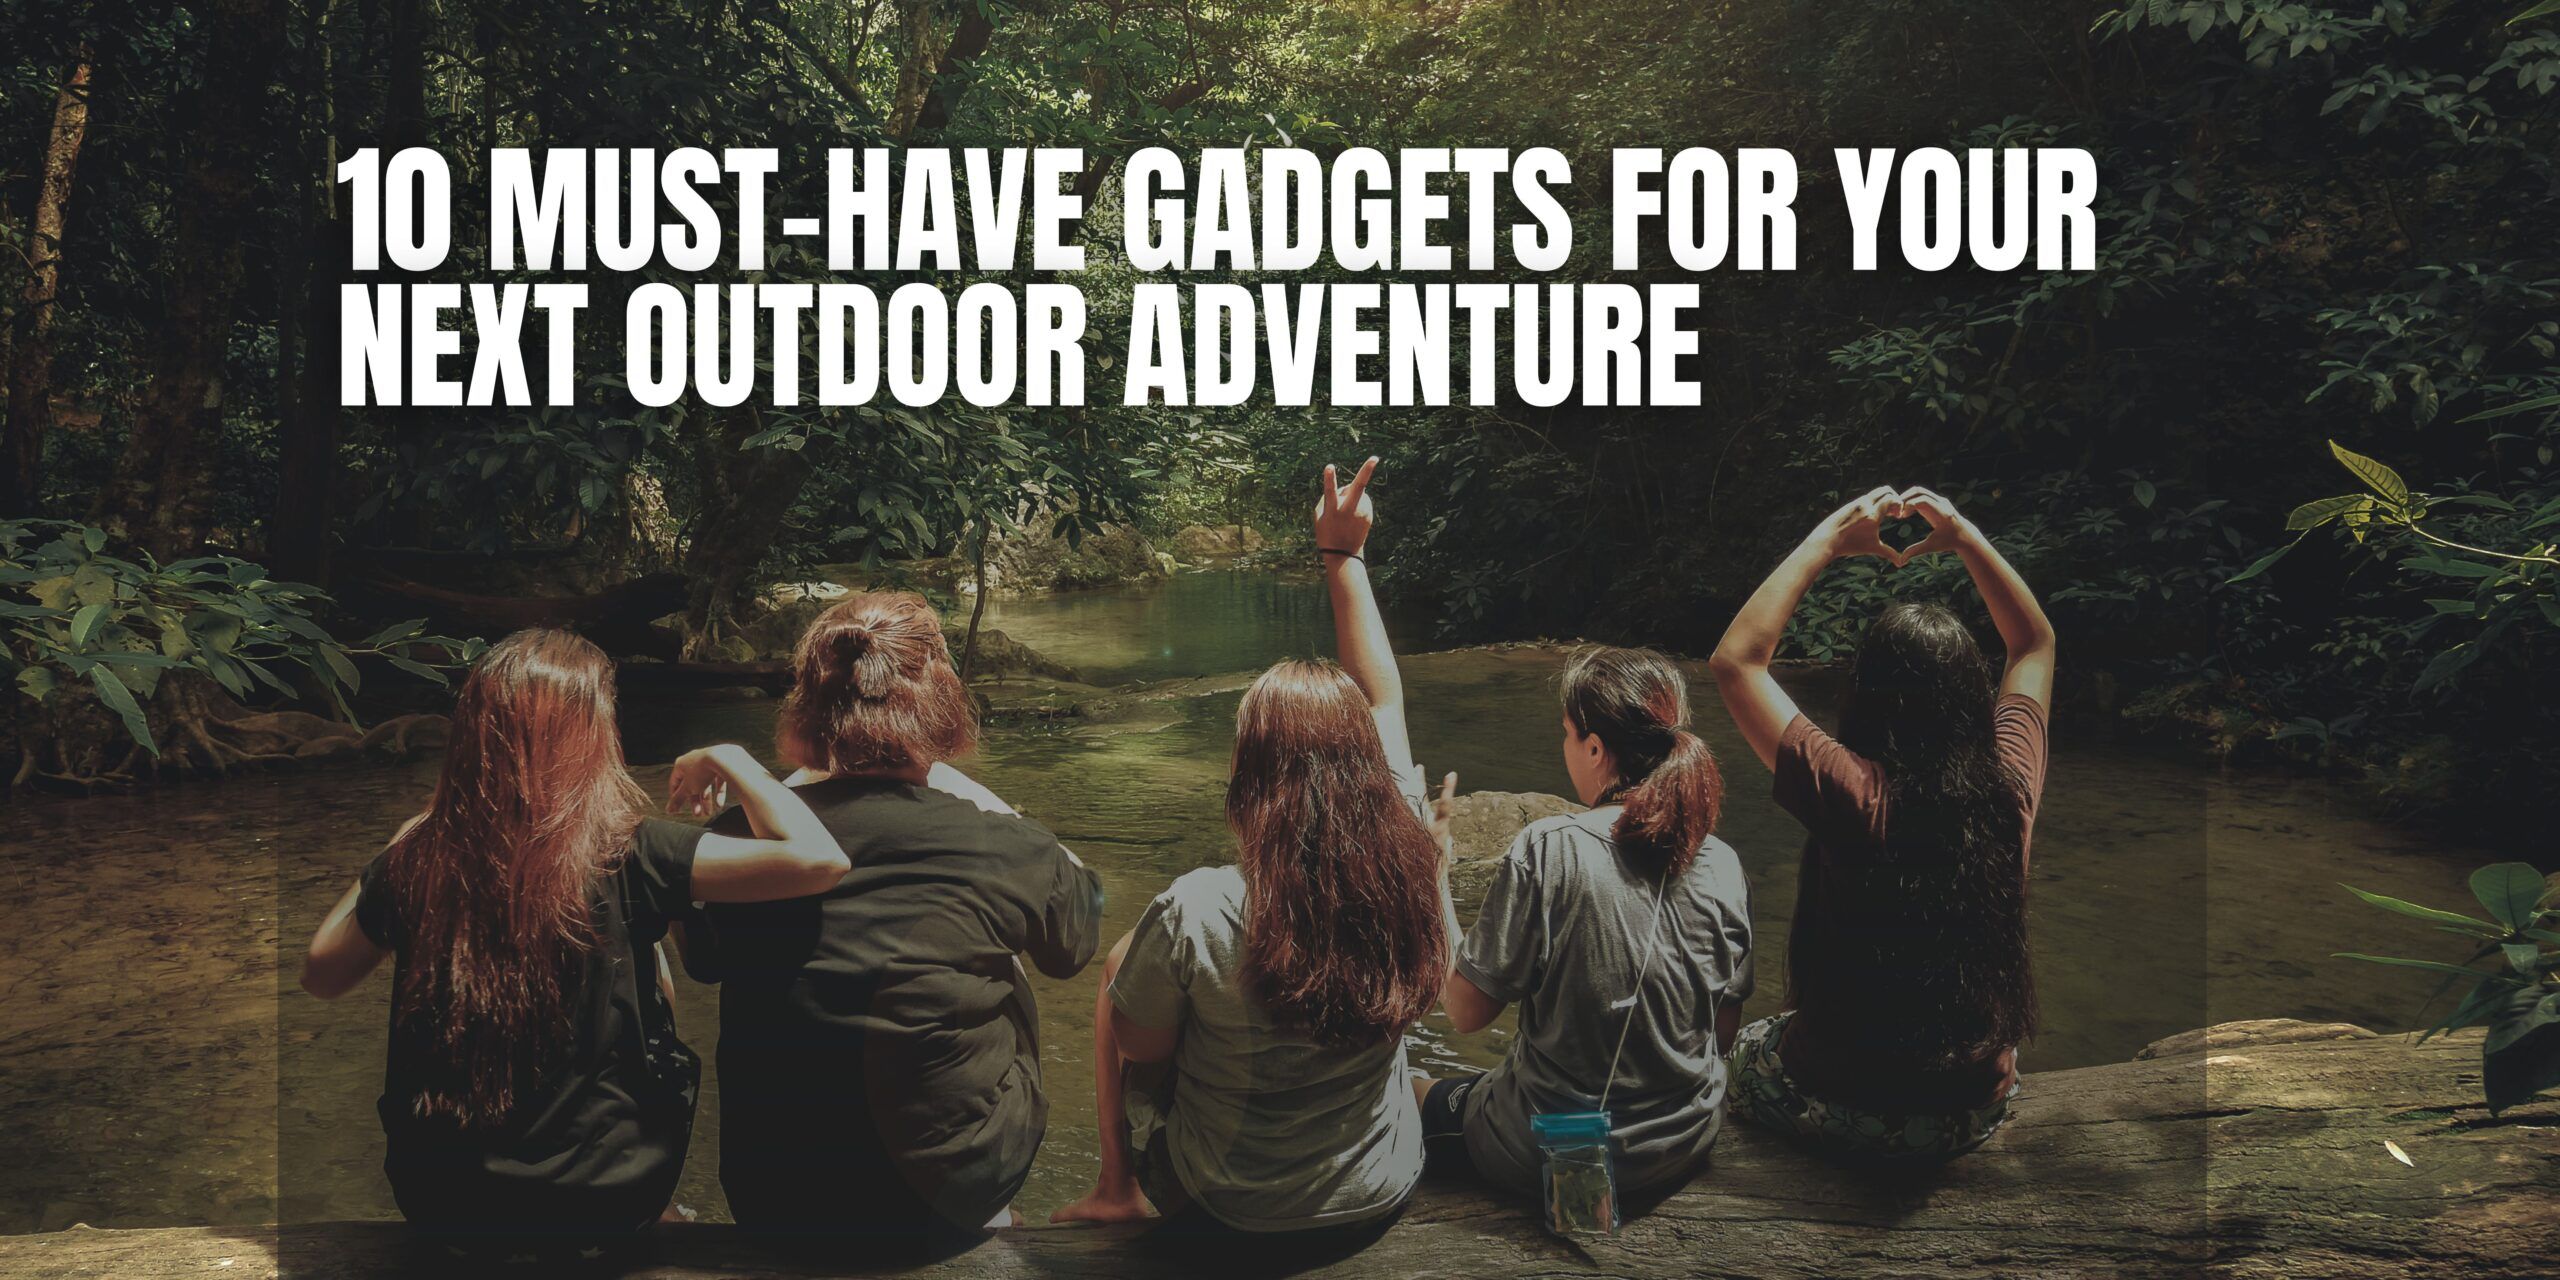 10 Must-Have Gadgets for Your Next Outdoor Adventure